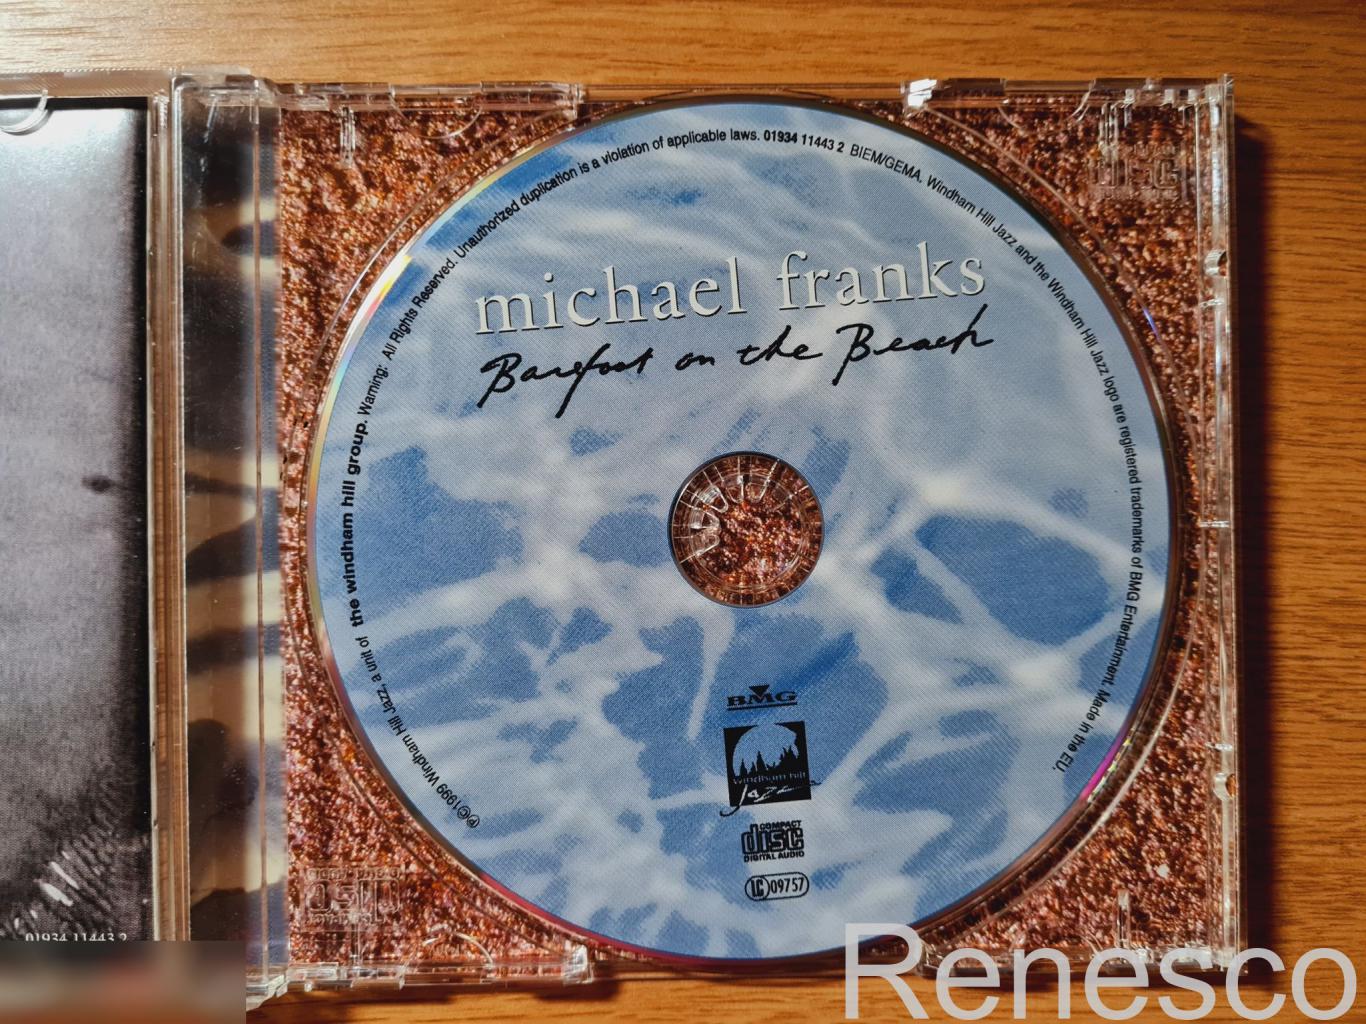 Michael Franks ?– Barefoot On The Beach (Europe) (1999) 4